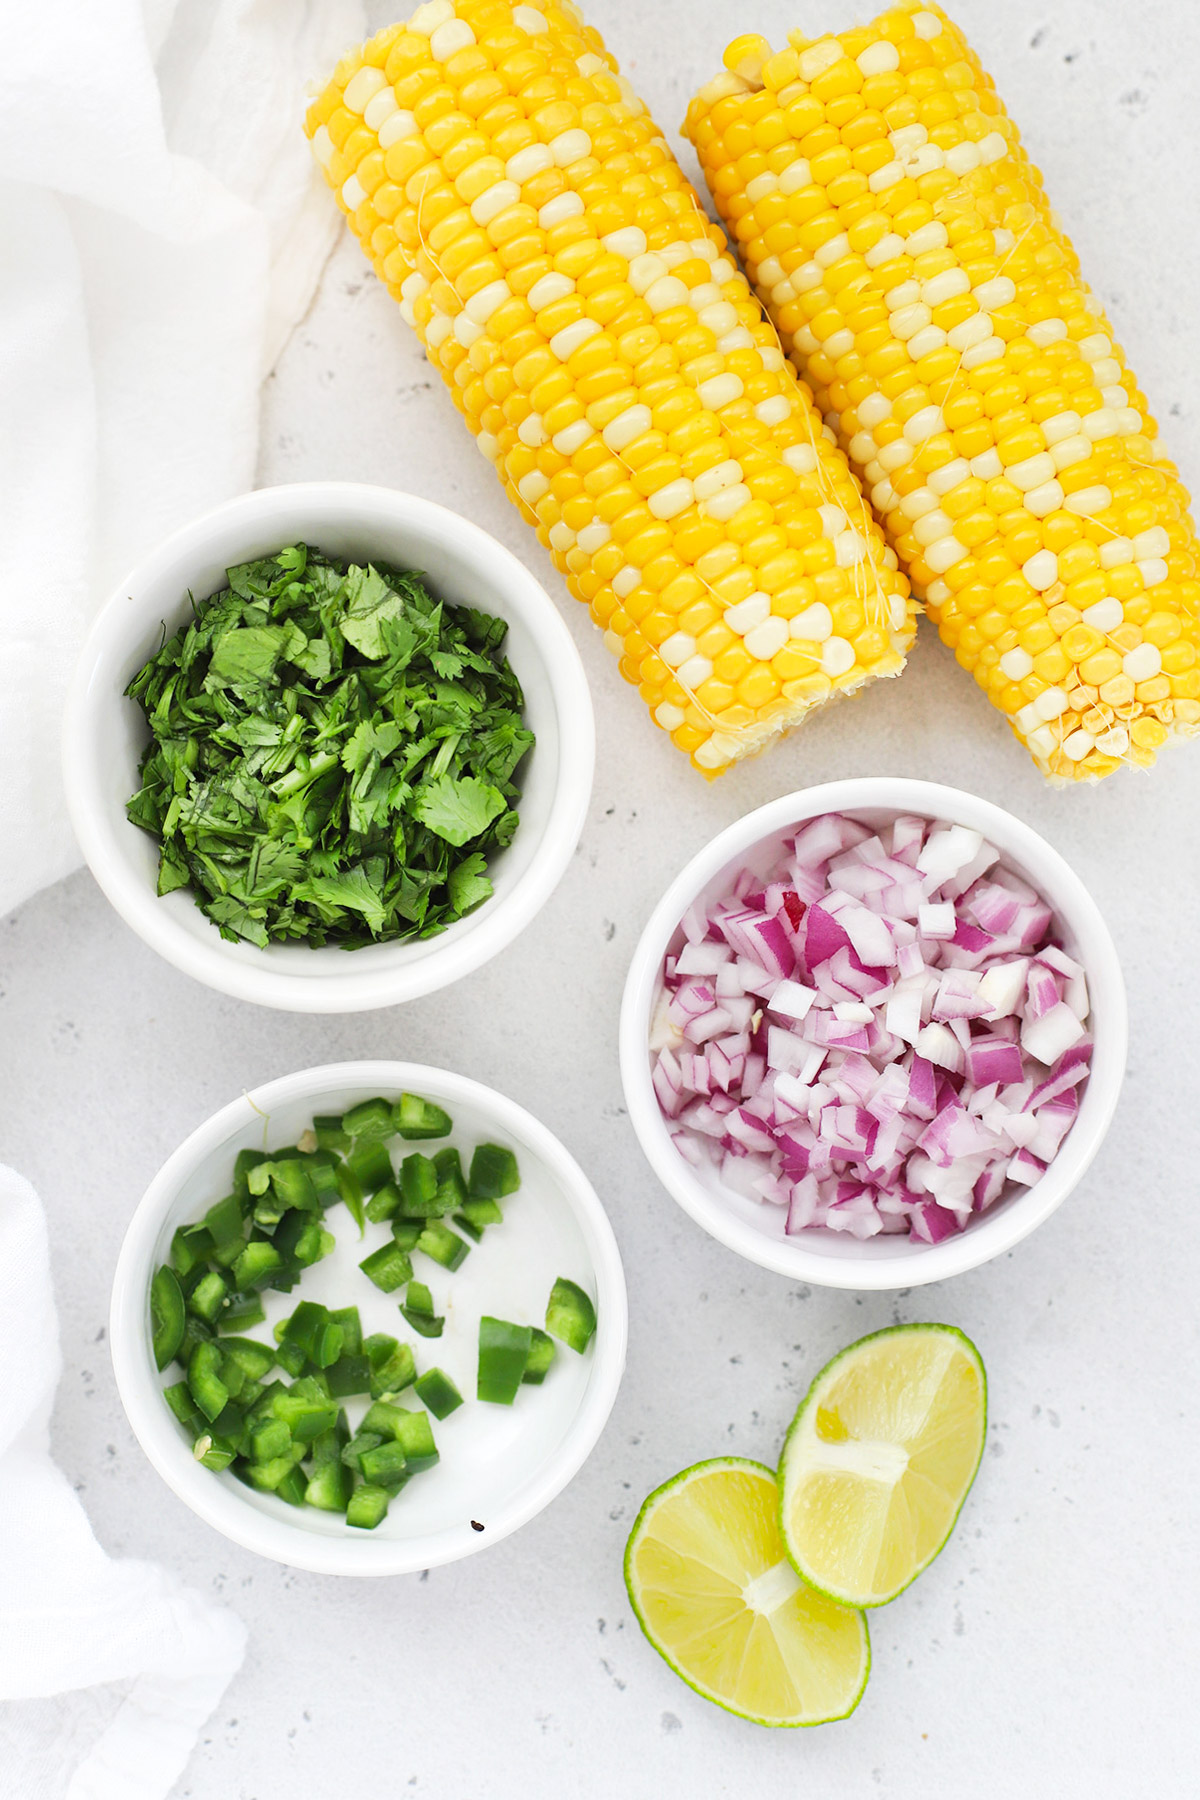 Overhead view of ingredients for fresh corn salsa arranged on a white backdrop--corn on the cob, cilantro, red onion, jalapeno, and fresh lime